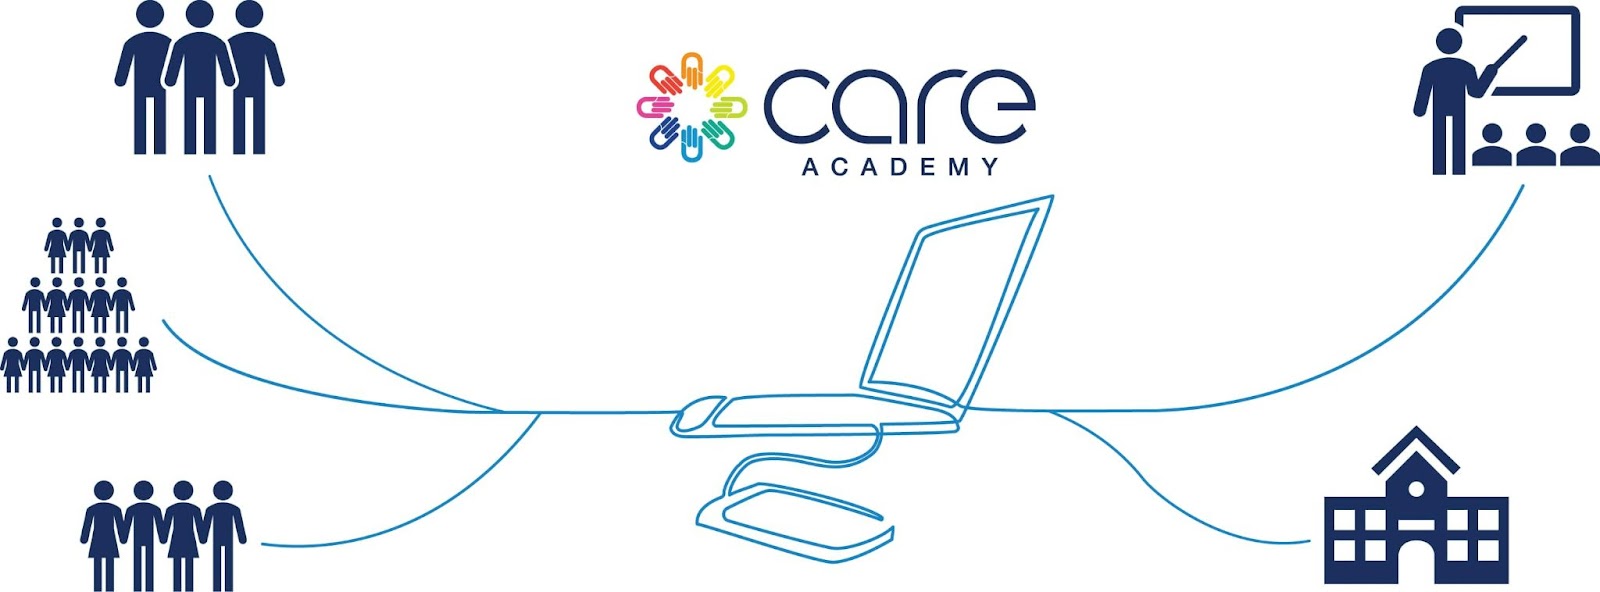 Infographic showing how Edgeworks™ Funding Alliance works: Edgeworks™ Care Academy, their learning platform connects HSC employees with FE providers and ITPs.